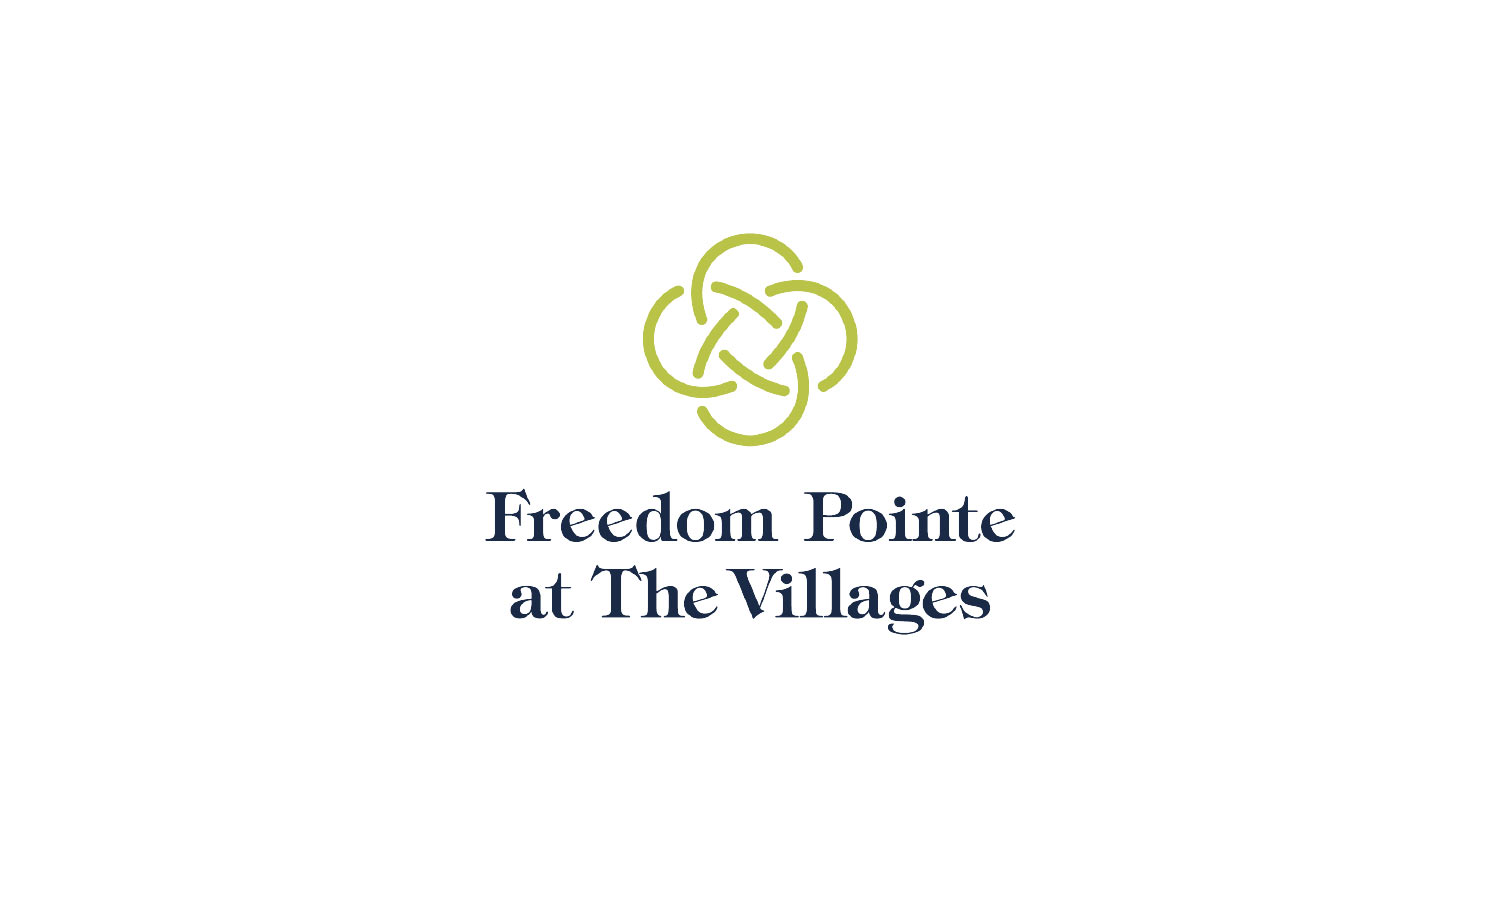 Freedom Pointe at The Villages logo